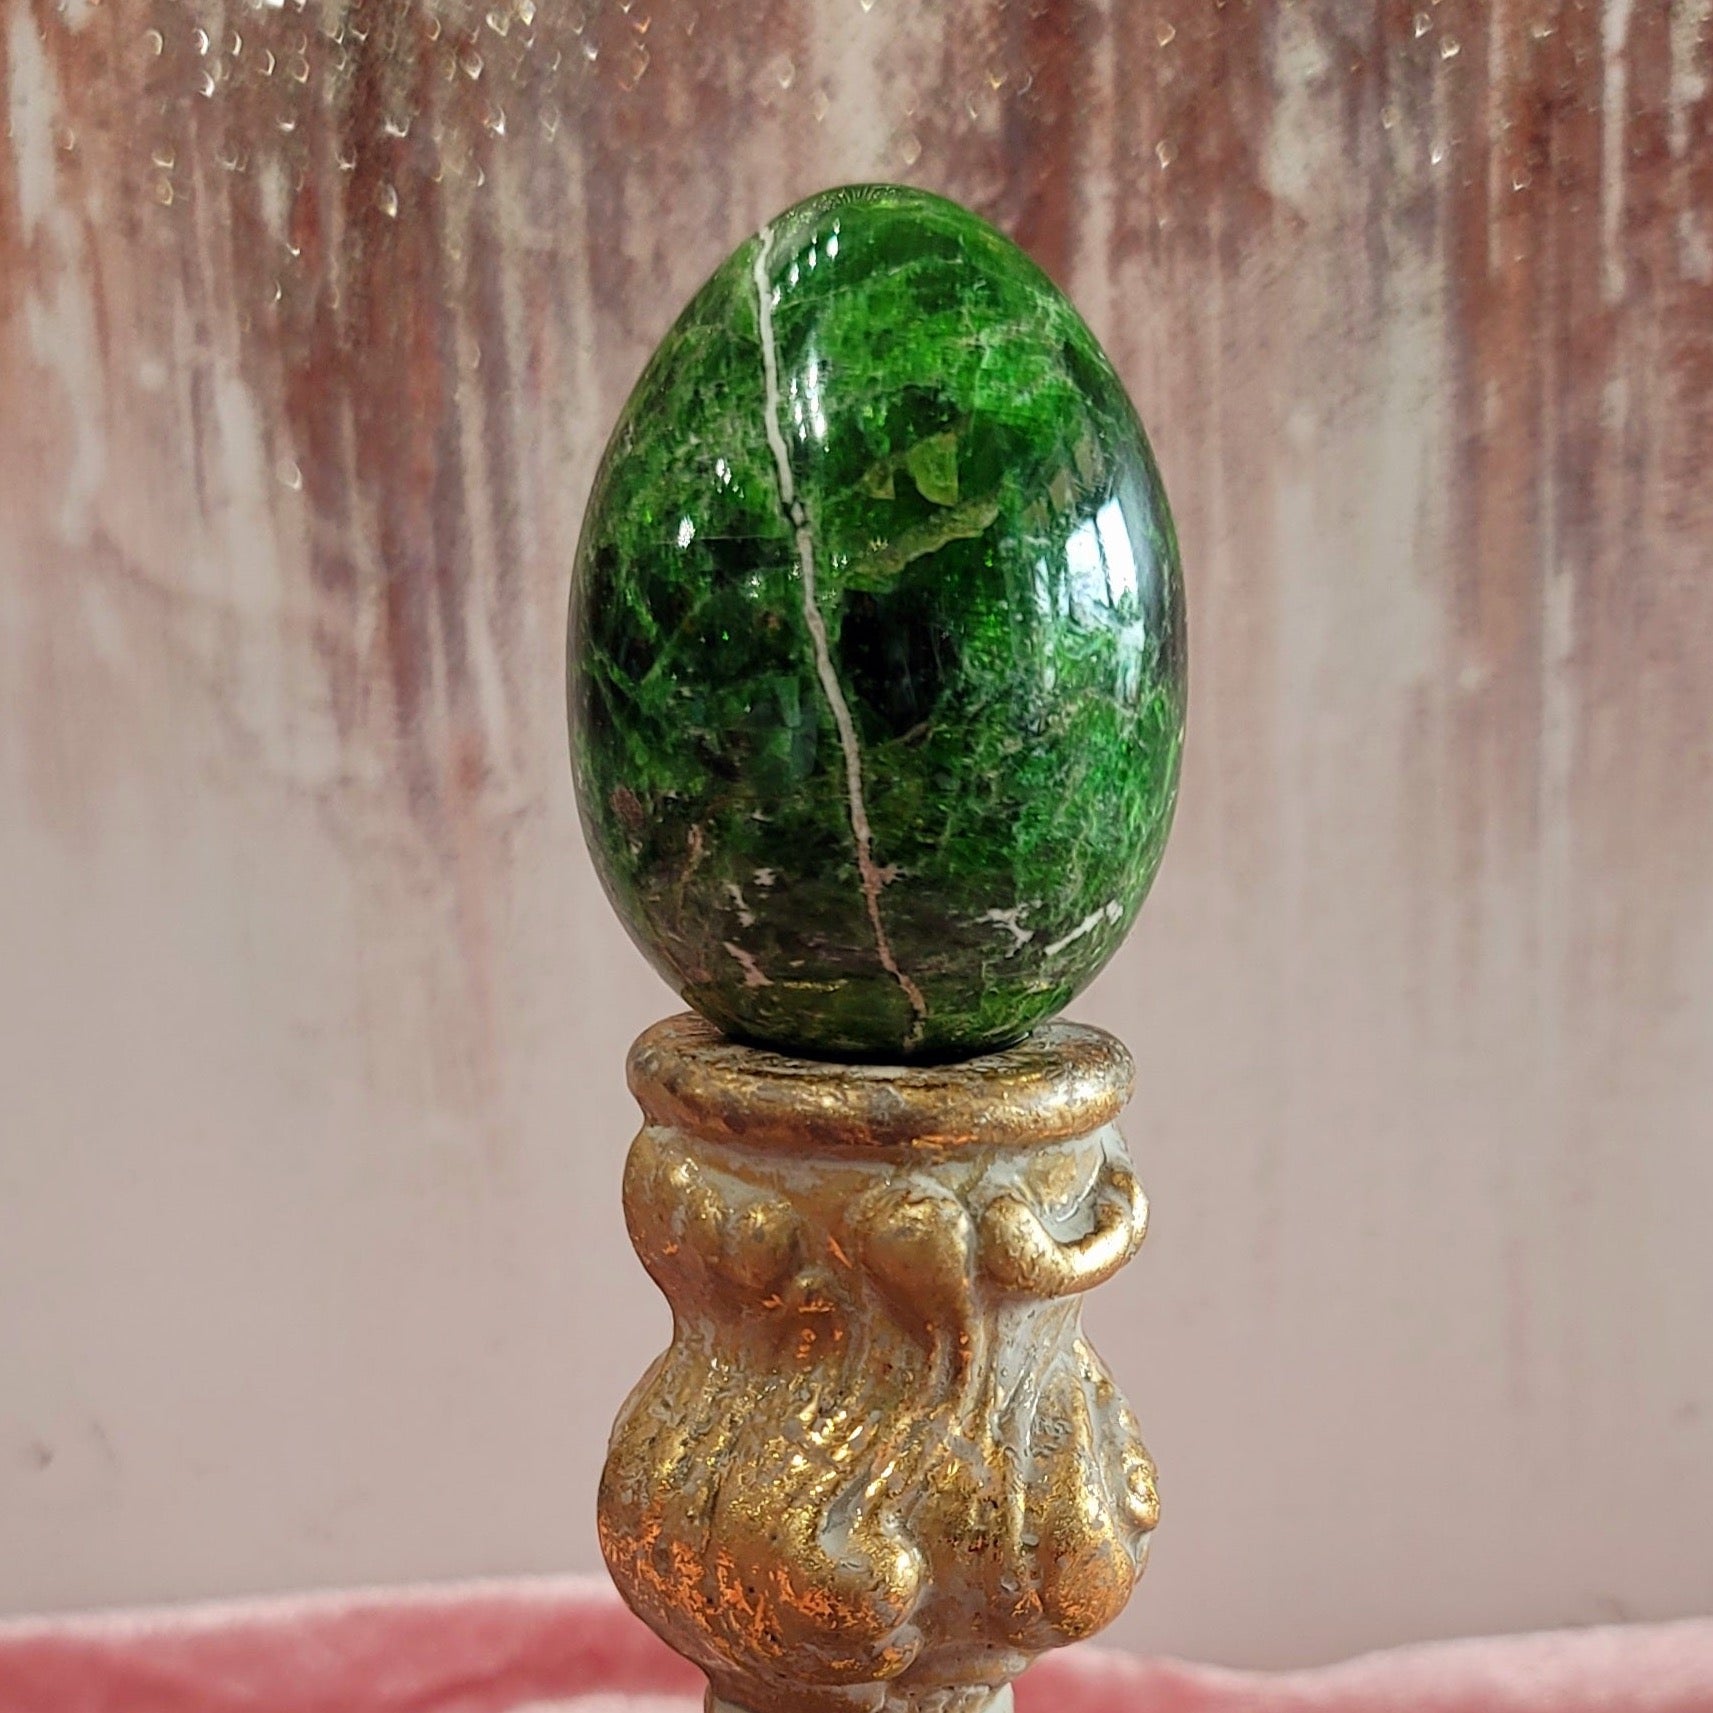 Chrome Diopside Egg (Extremely Rare)